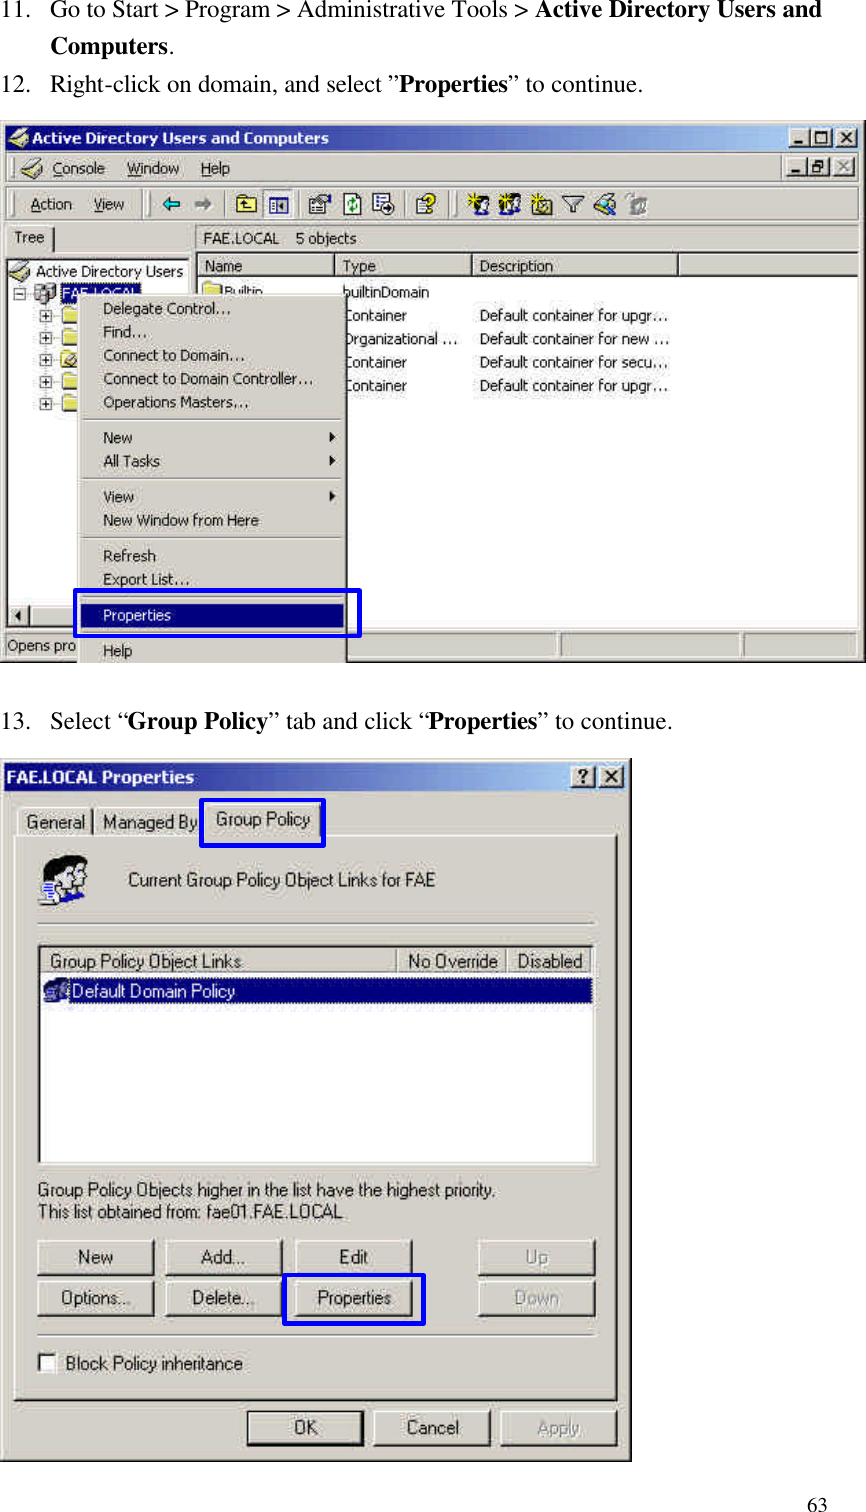  6311. Go to Start &gt; Program &gt; Administrative Tools &gt; Active Directory Users and Computers. 12. Right-click on domain, and select ”Properties” to continue.                 13. Select “Group Policy” tab and click “Properties” to continue.                   